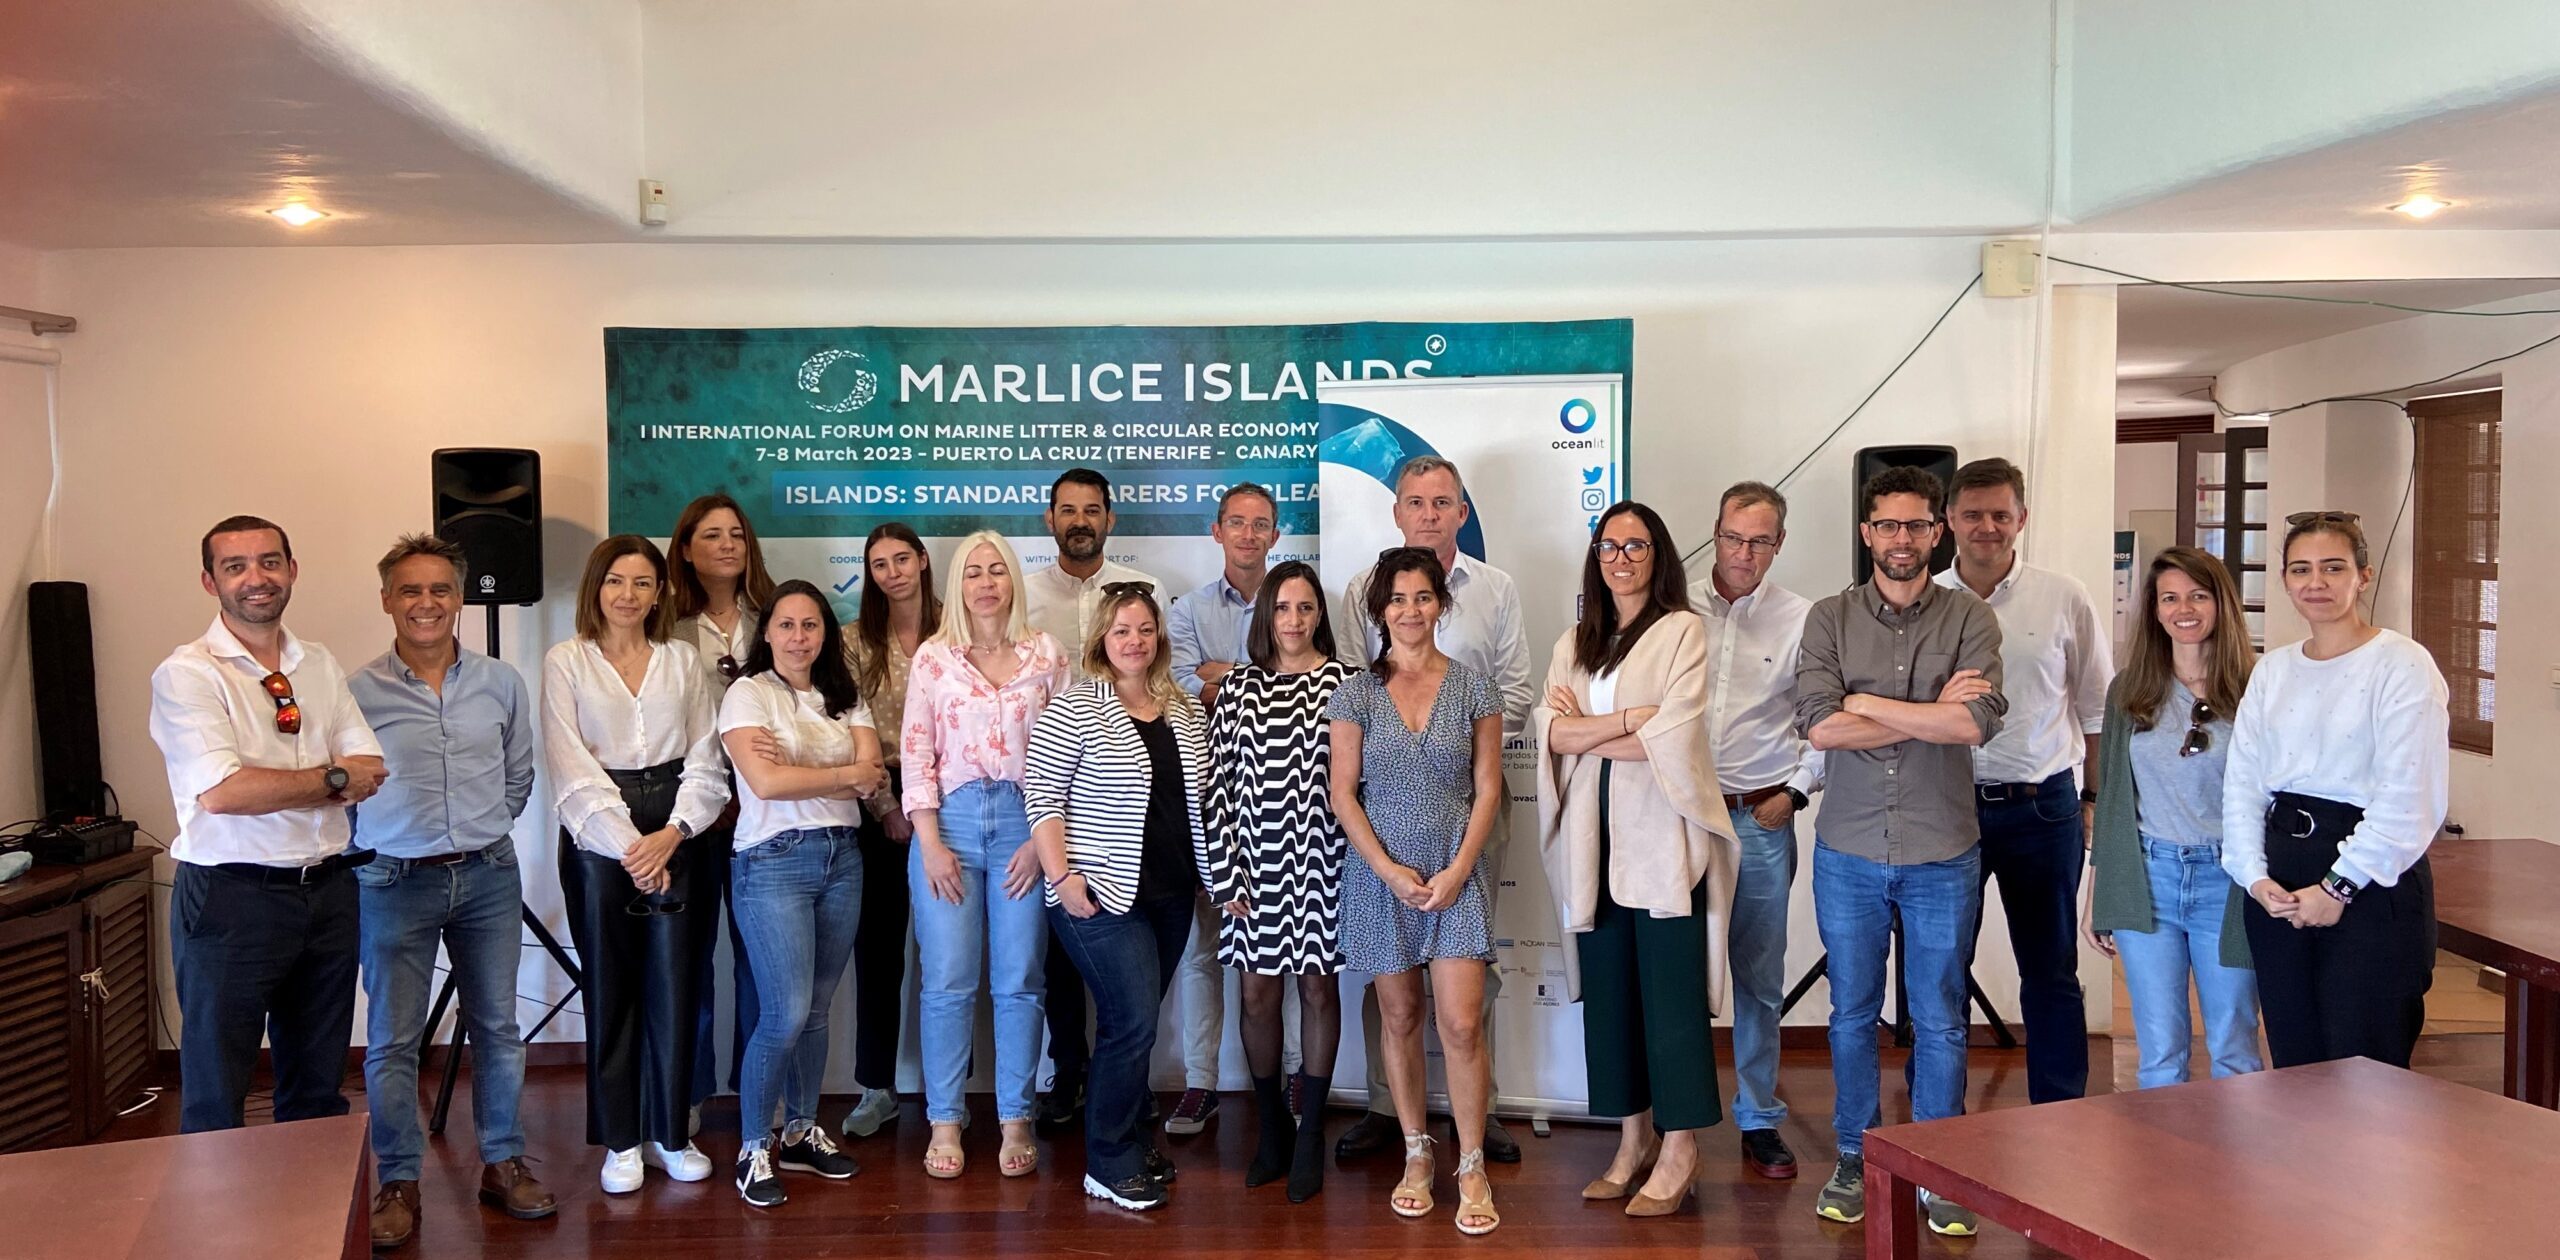 PLOCAN at the OceanLit project meeting and at the Marlice Islands forum